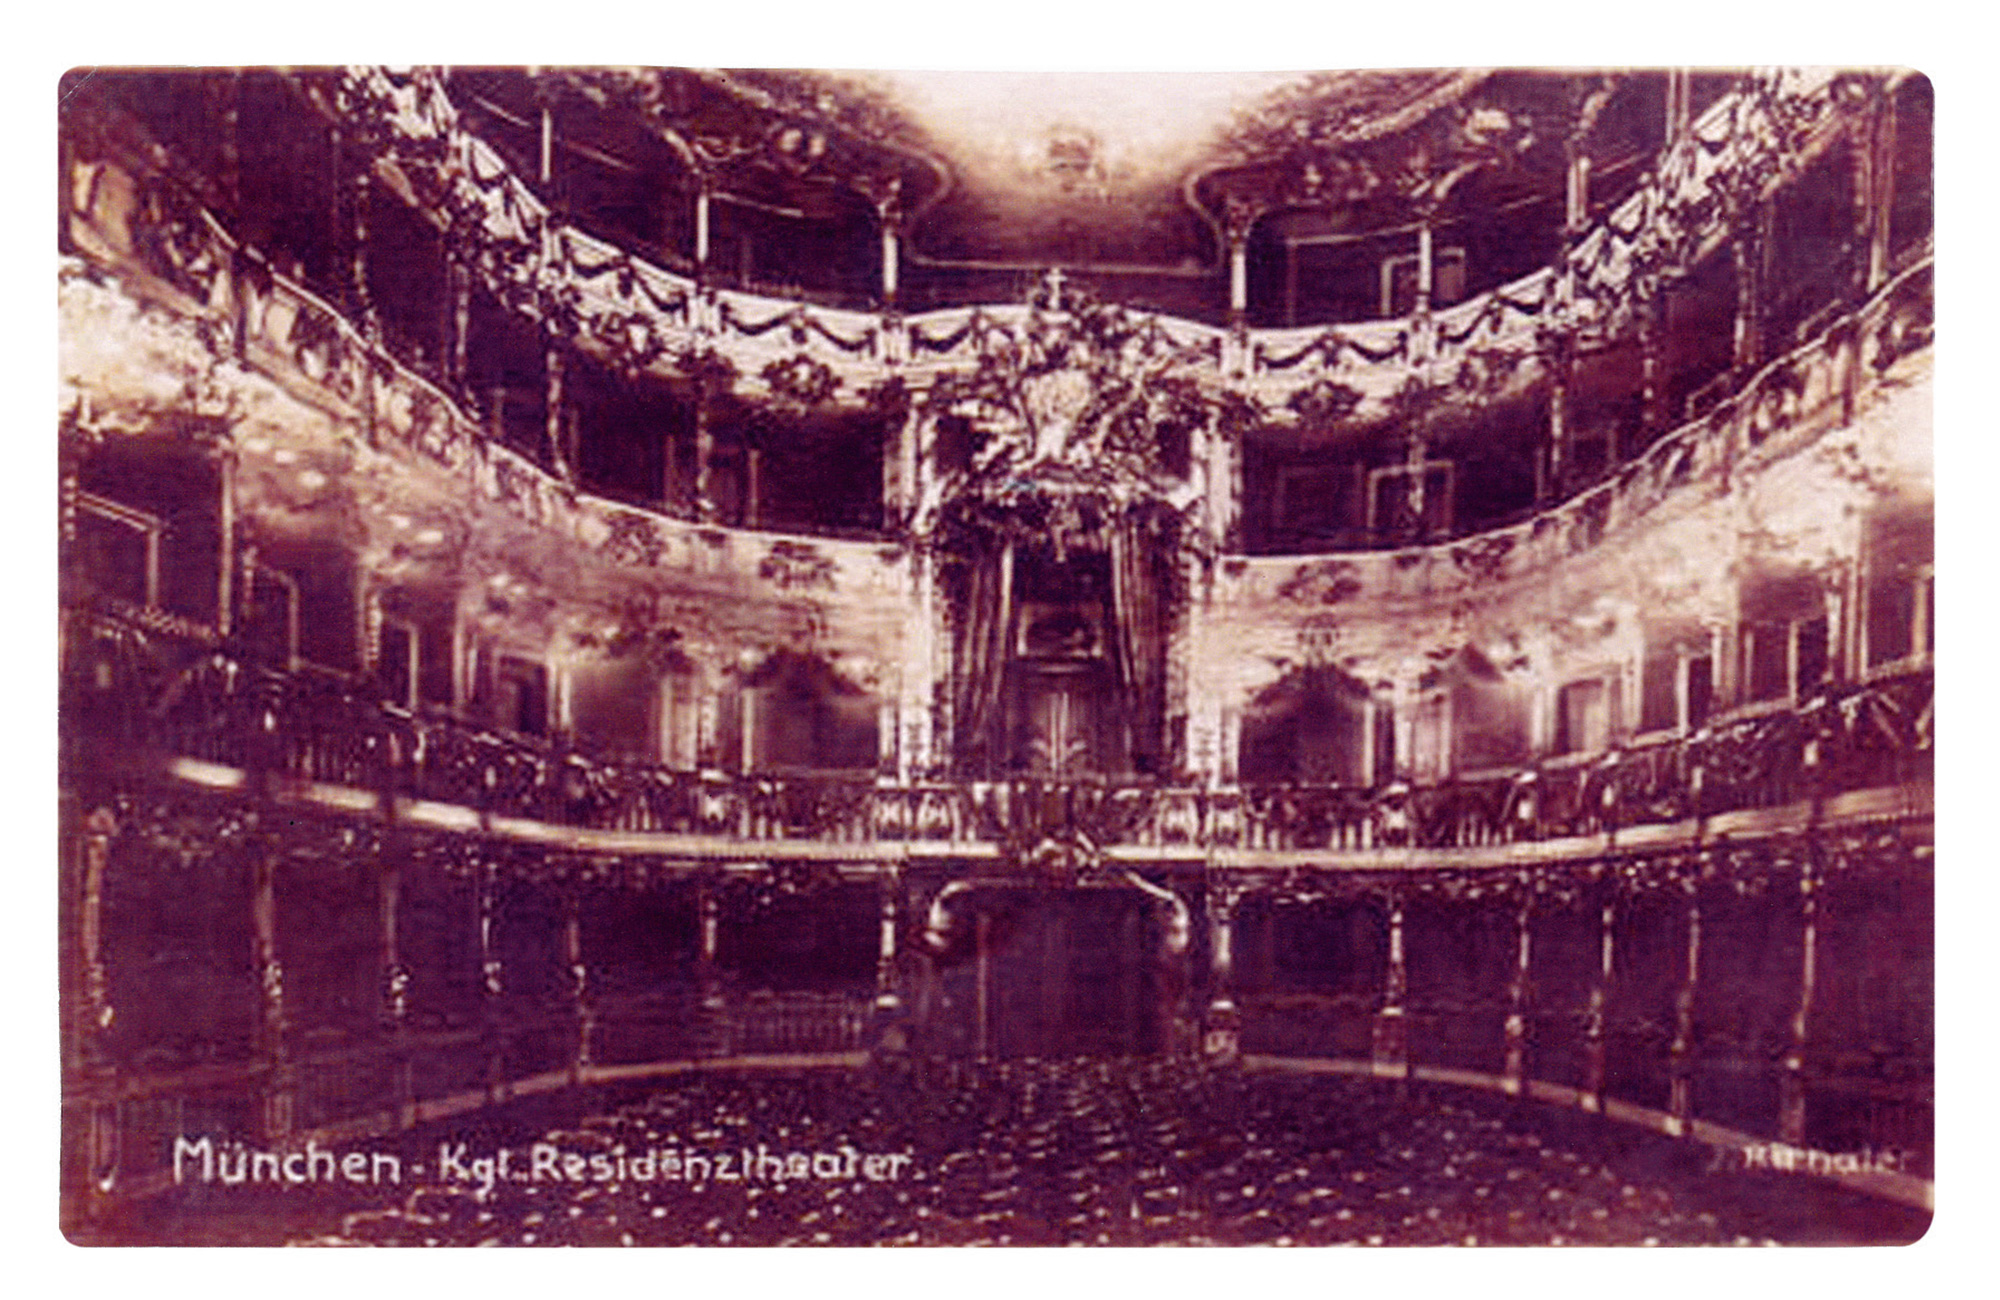 A postcard from nineteen twenty showing the interior of Munich’s Residenztheater.